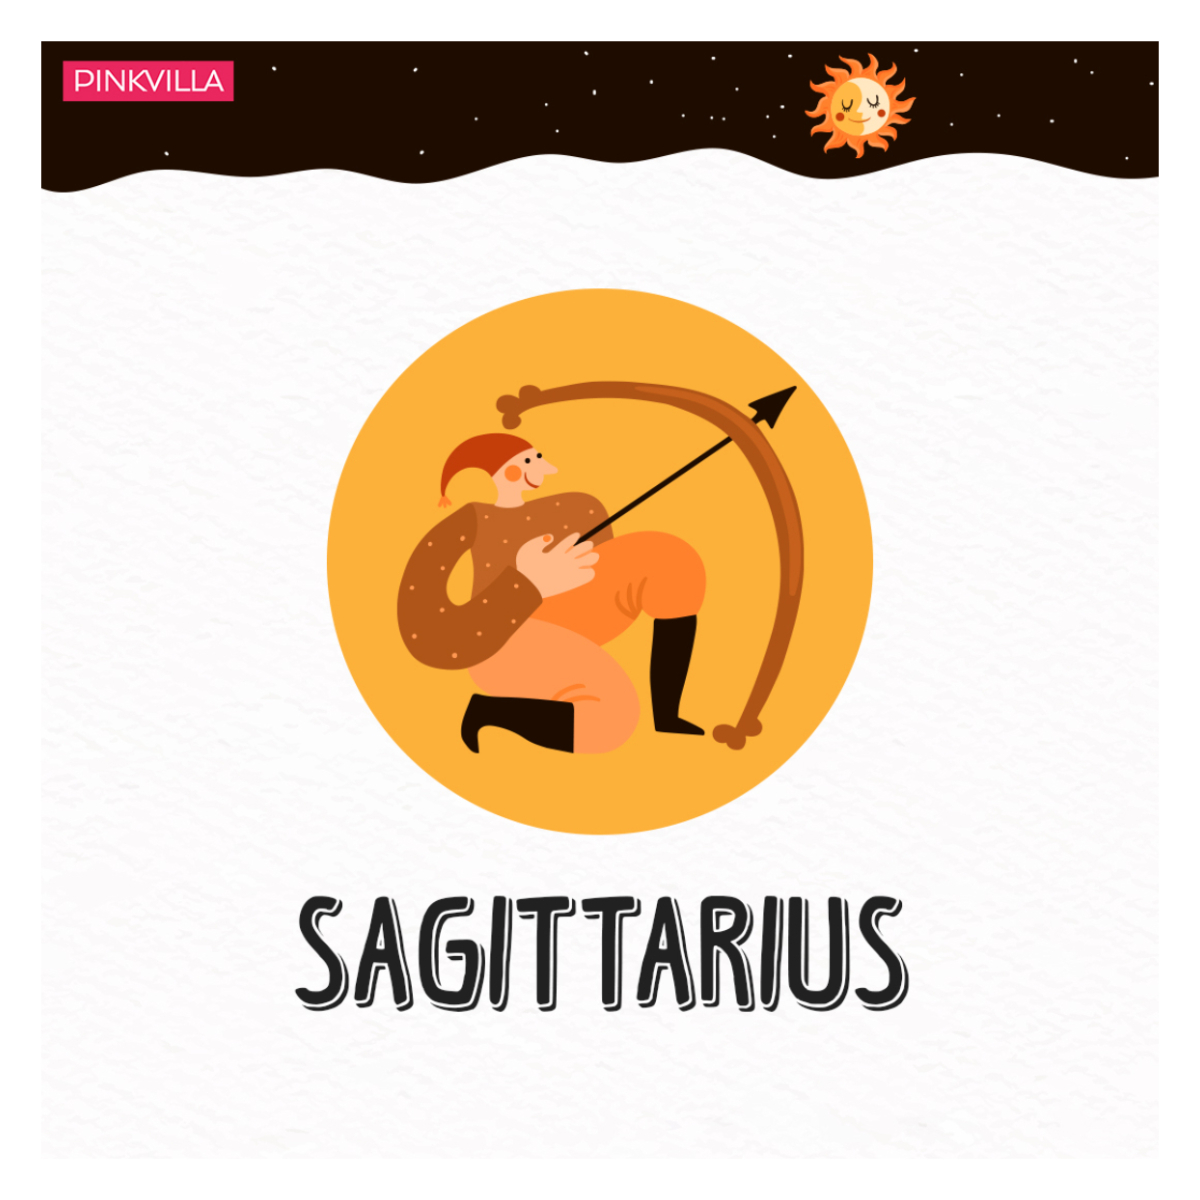 Astro talk: From Libra to Sagittarius, here are the zodiac signs that are evil